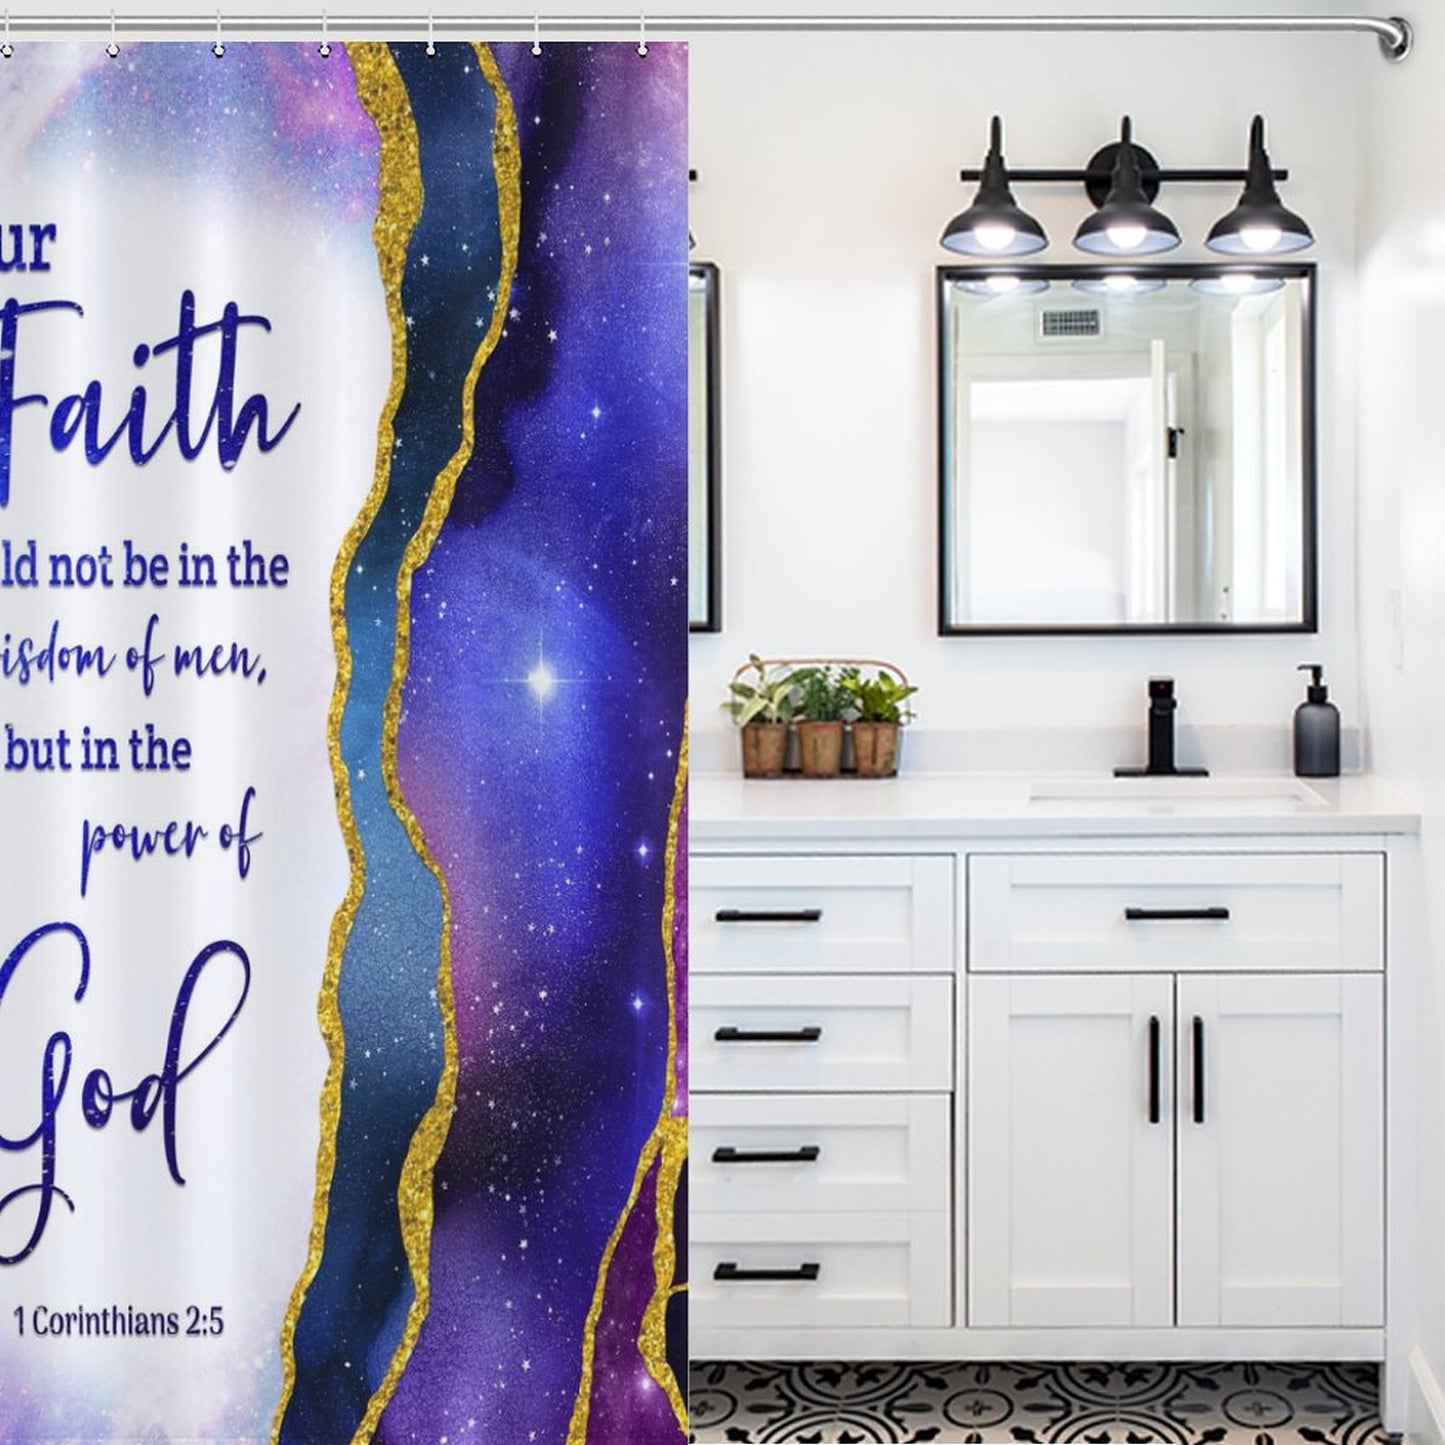 Your Faith Should Be In The Power Of God Christian Shower Curtain-66x72Inch (168x183cm) SALE-Personal Design